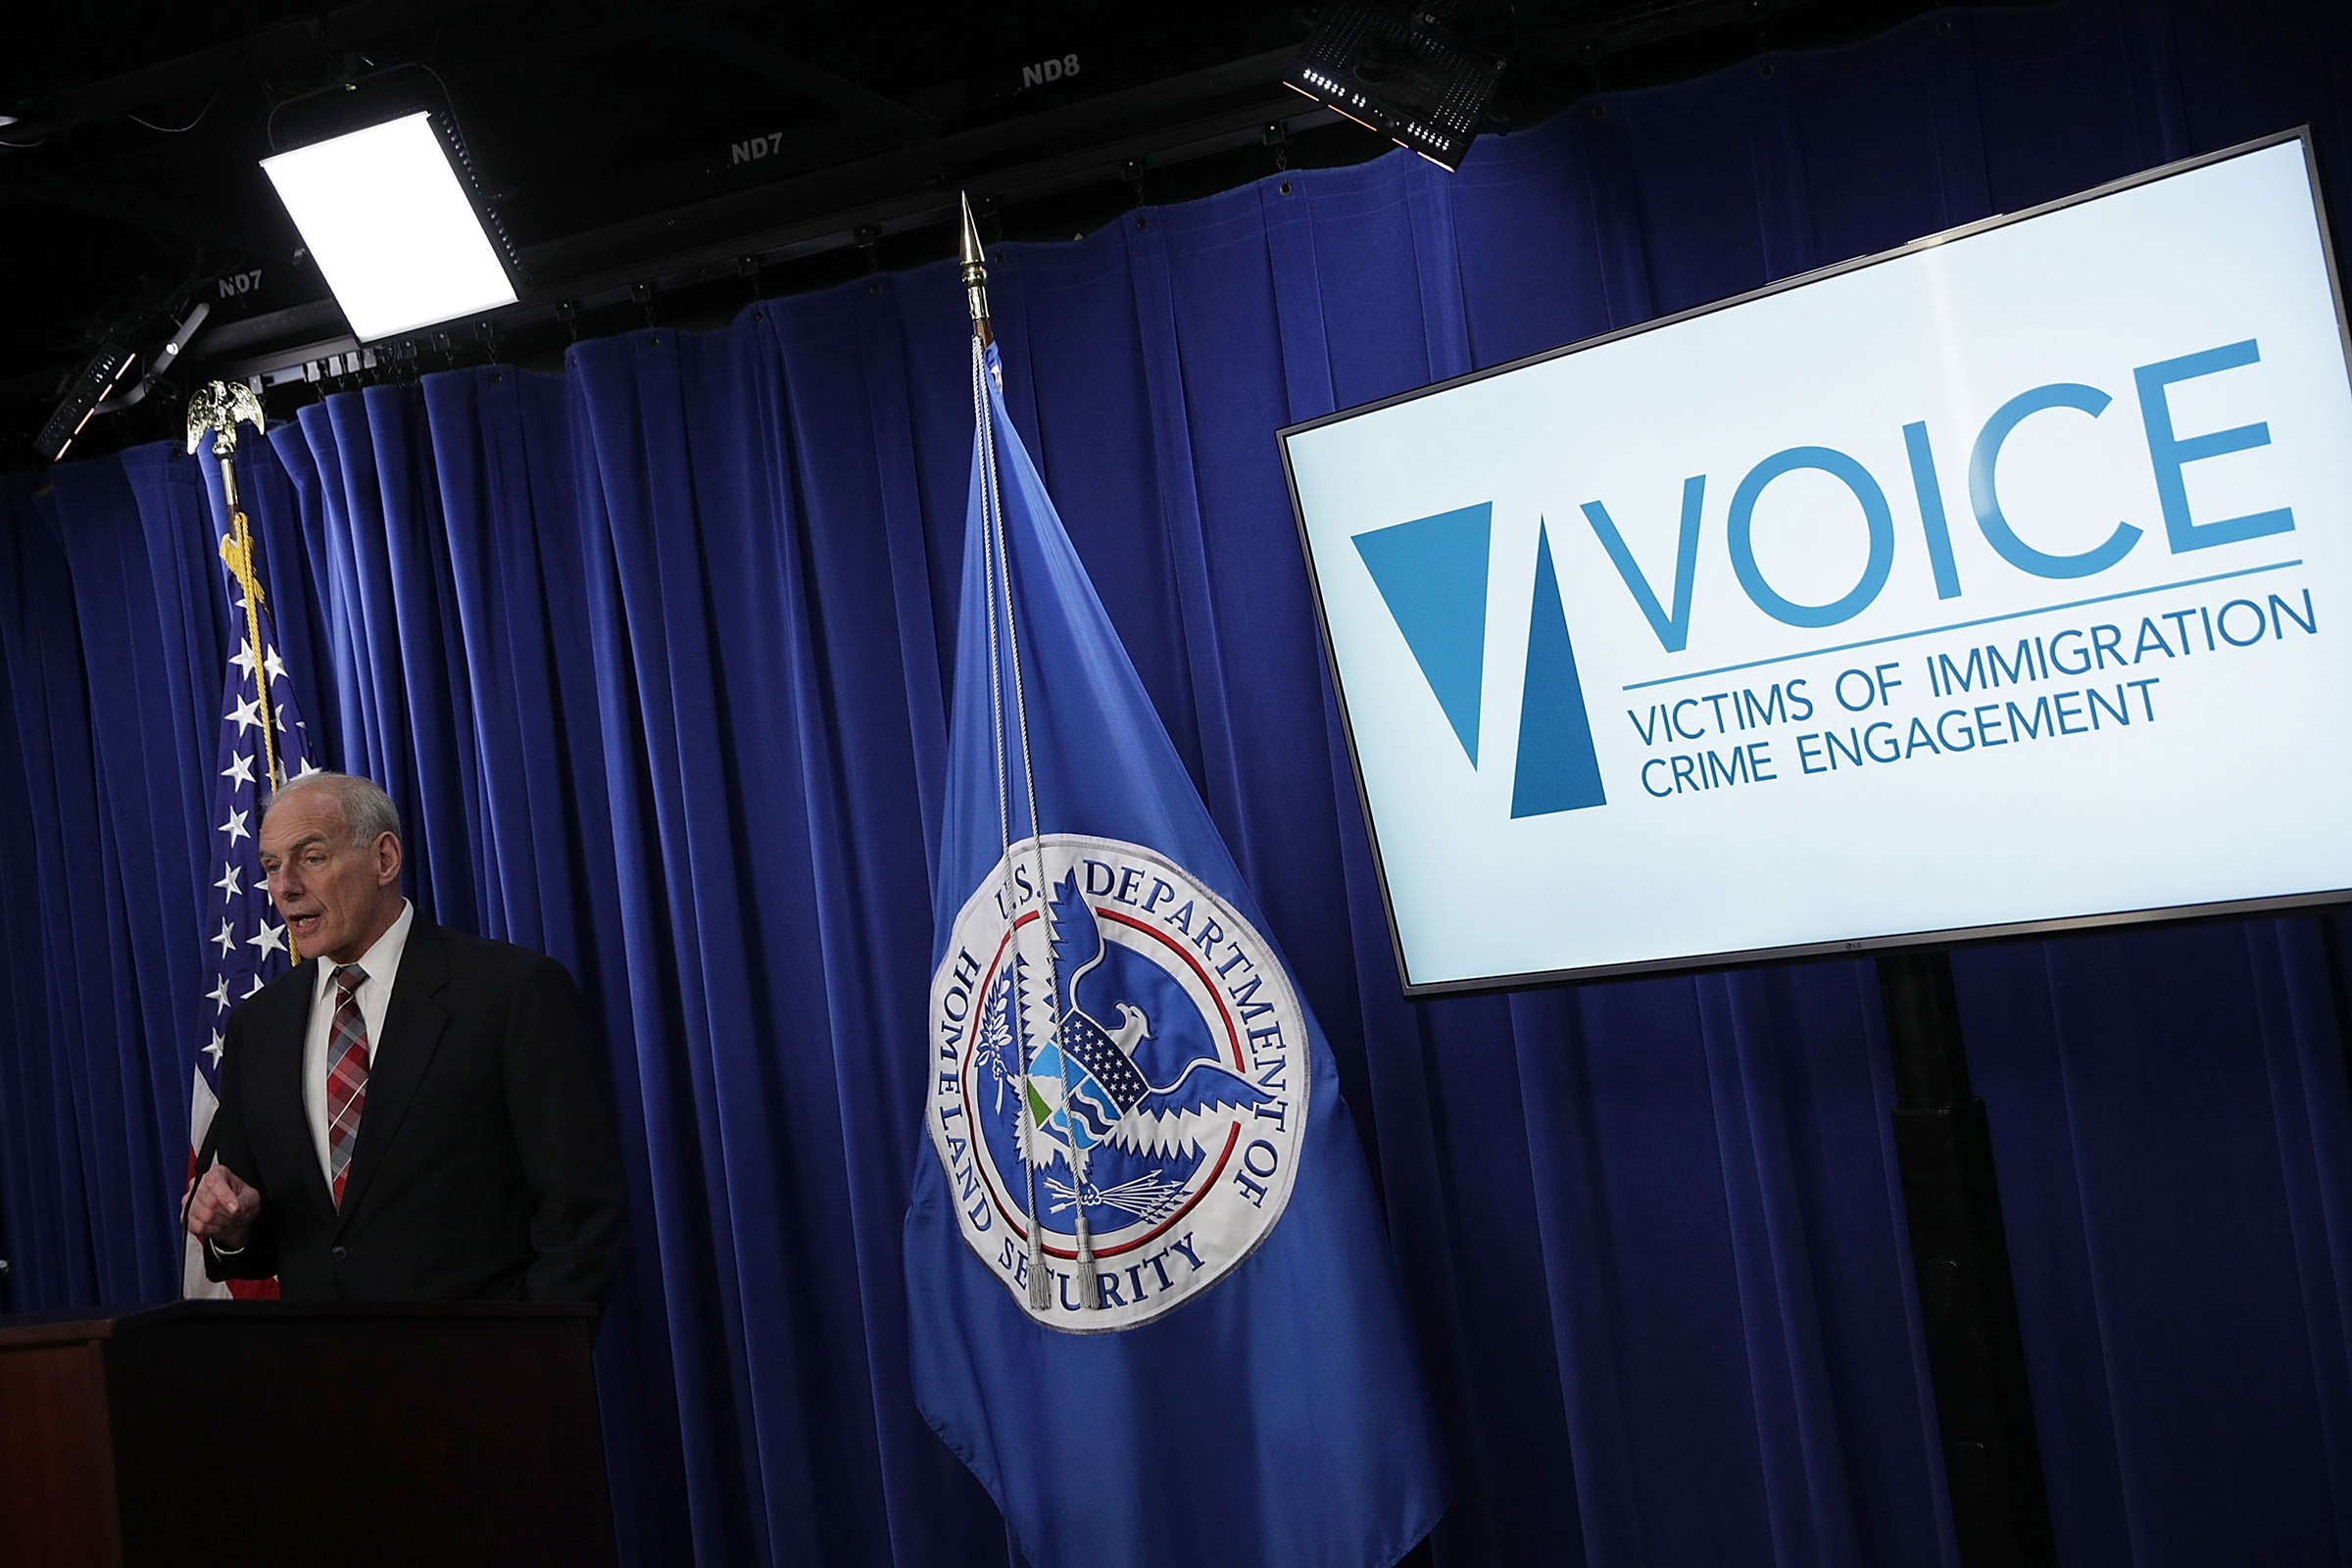 Homeland Security Secretary John Kelly speaks during a news conference April 26, 2017 in Washington, DC. Kelly announced the opening of the new Victims of Immigration Crime Engagement (VOICE) office.